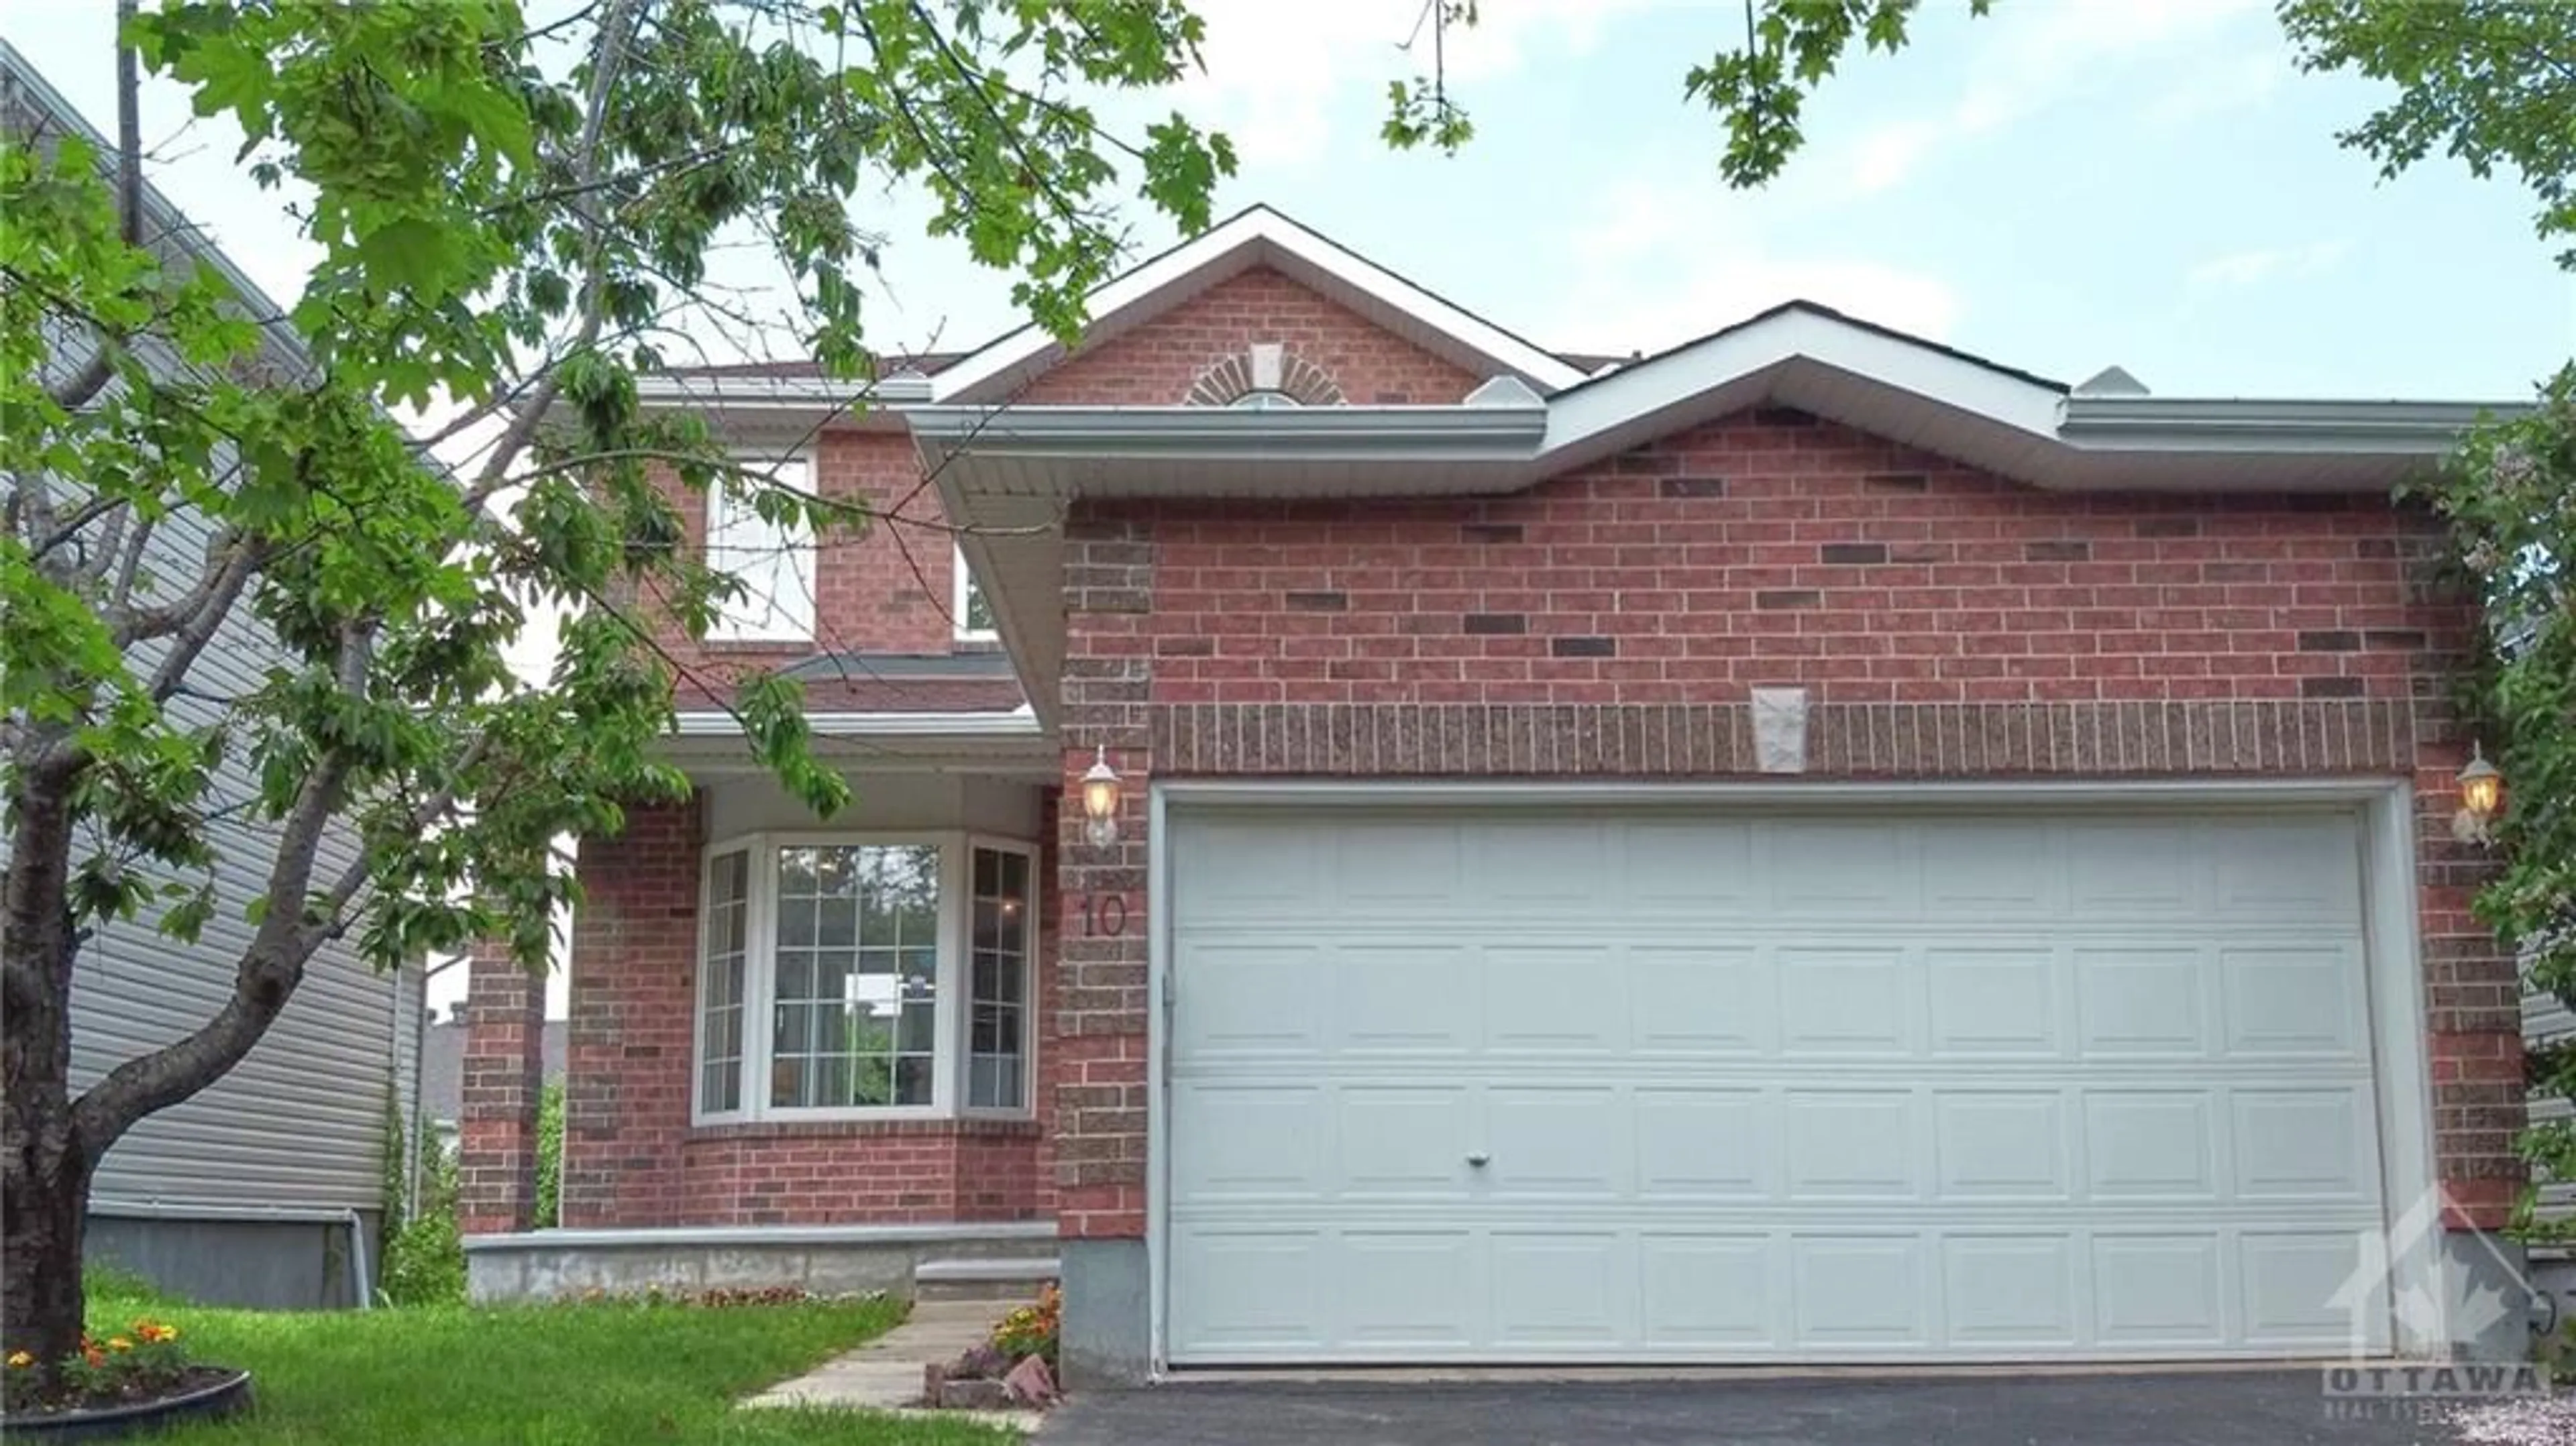 Home with brick exterior material for 10 RAYBURN St, Ottawa Ontario K2K 3K8